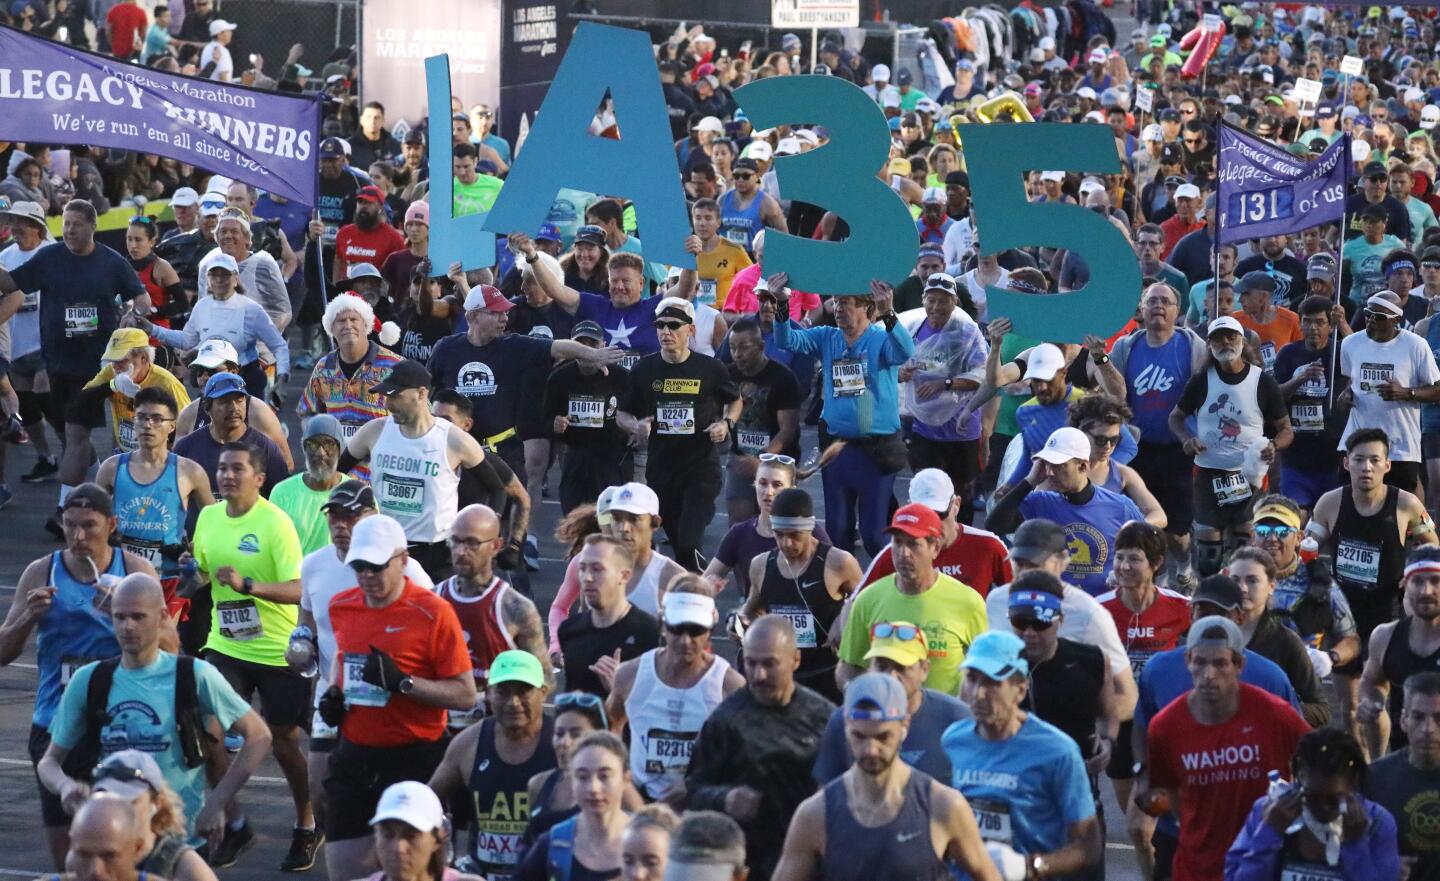 And they're off. Runners begin the 35th annual L.A. Marathon from Dodger Stadium on Sunday.